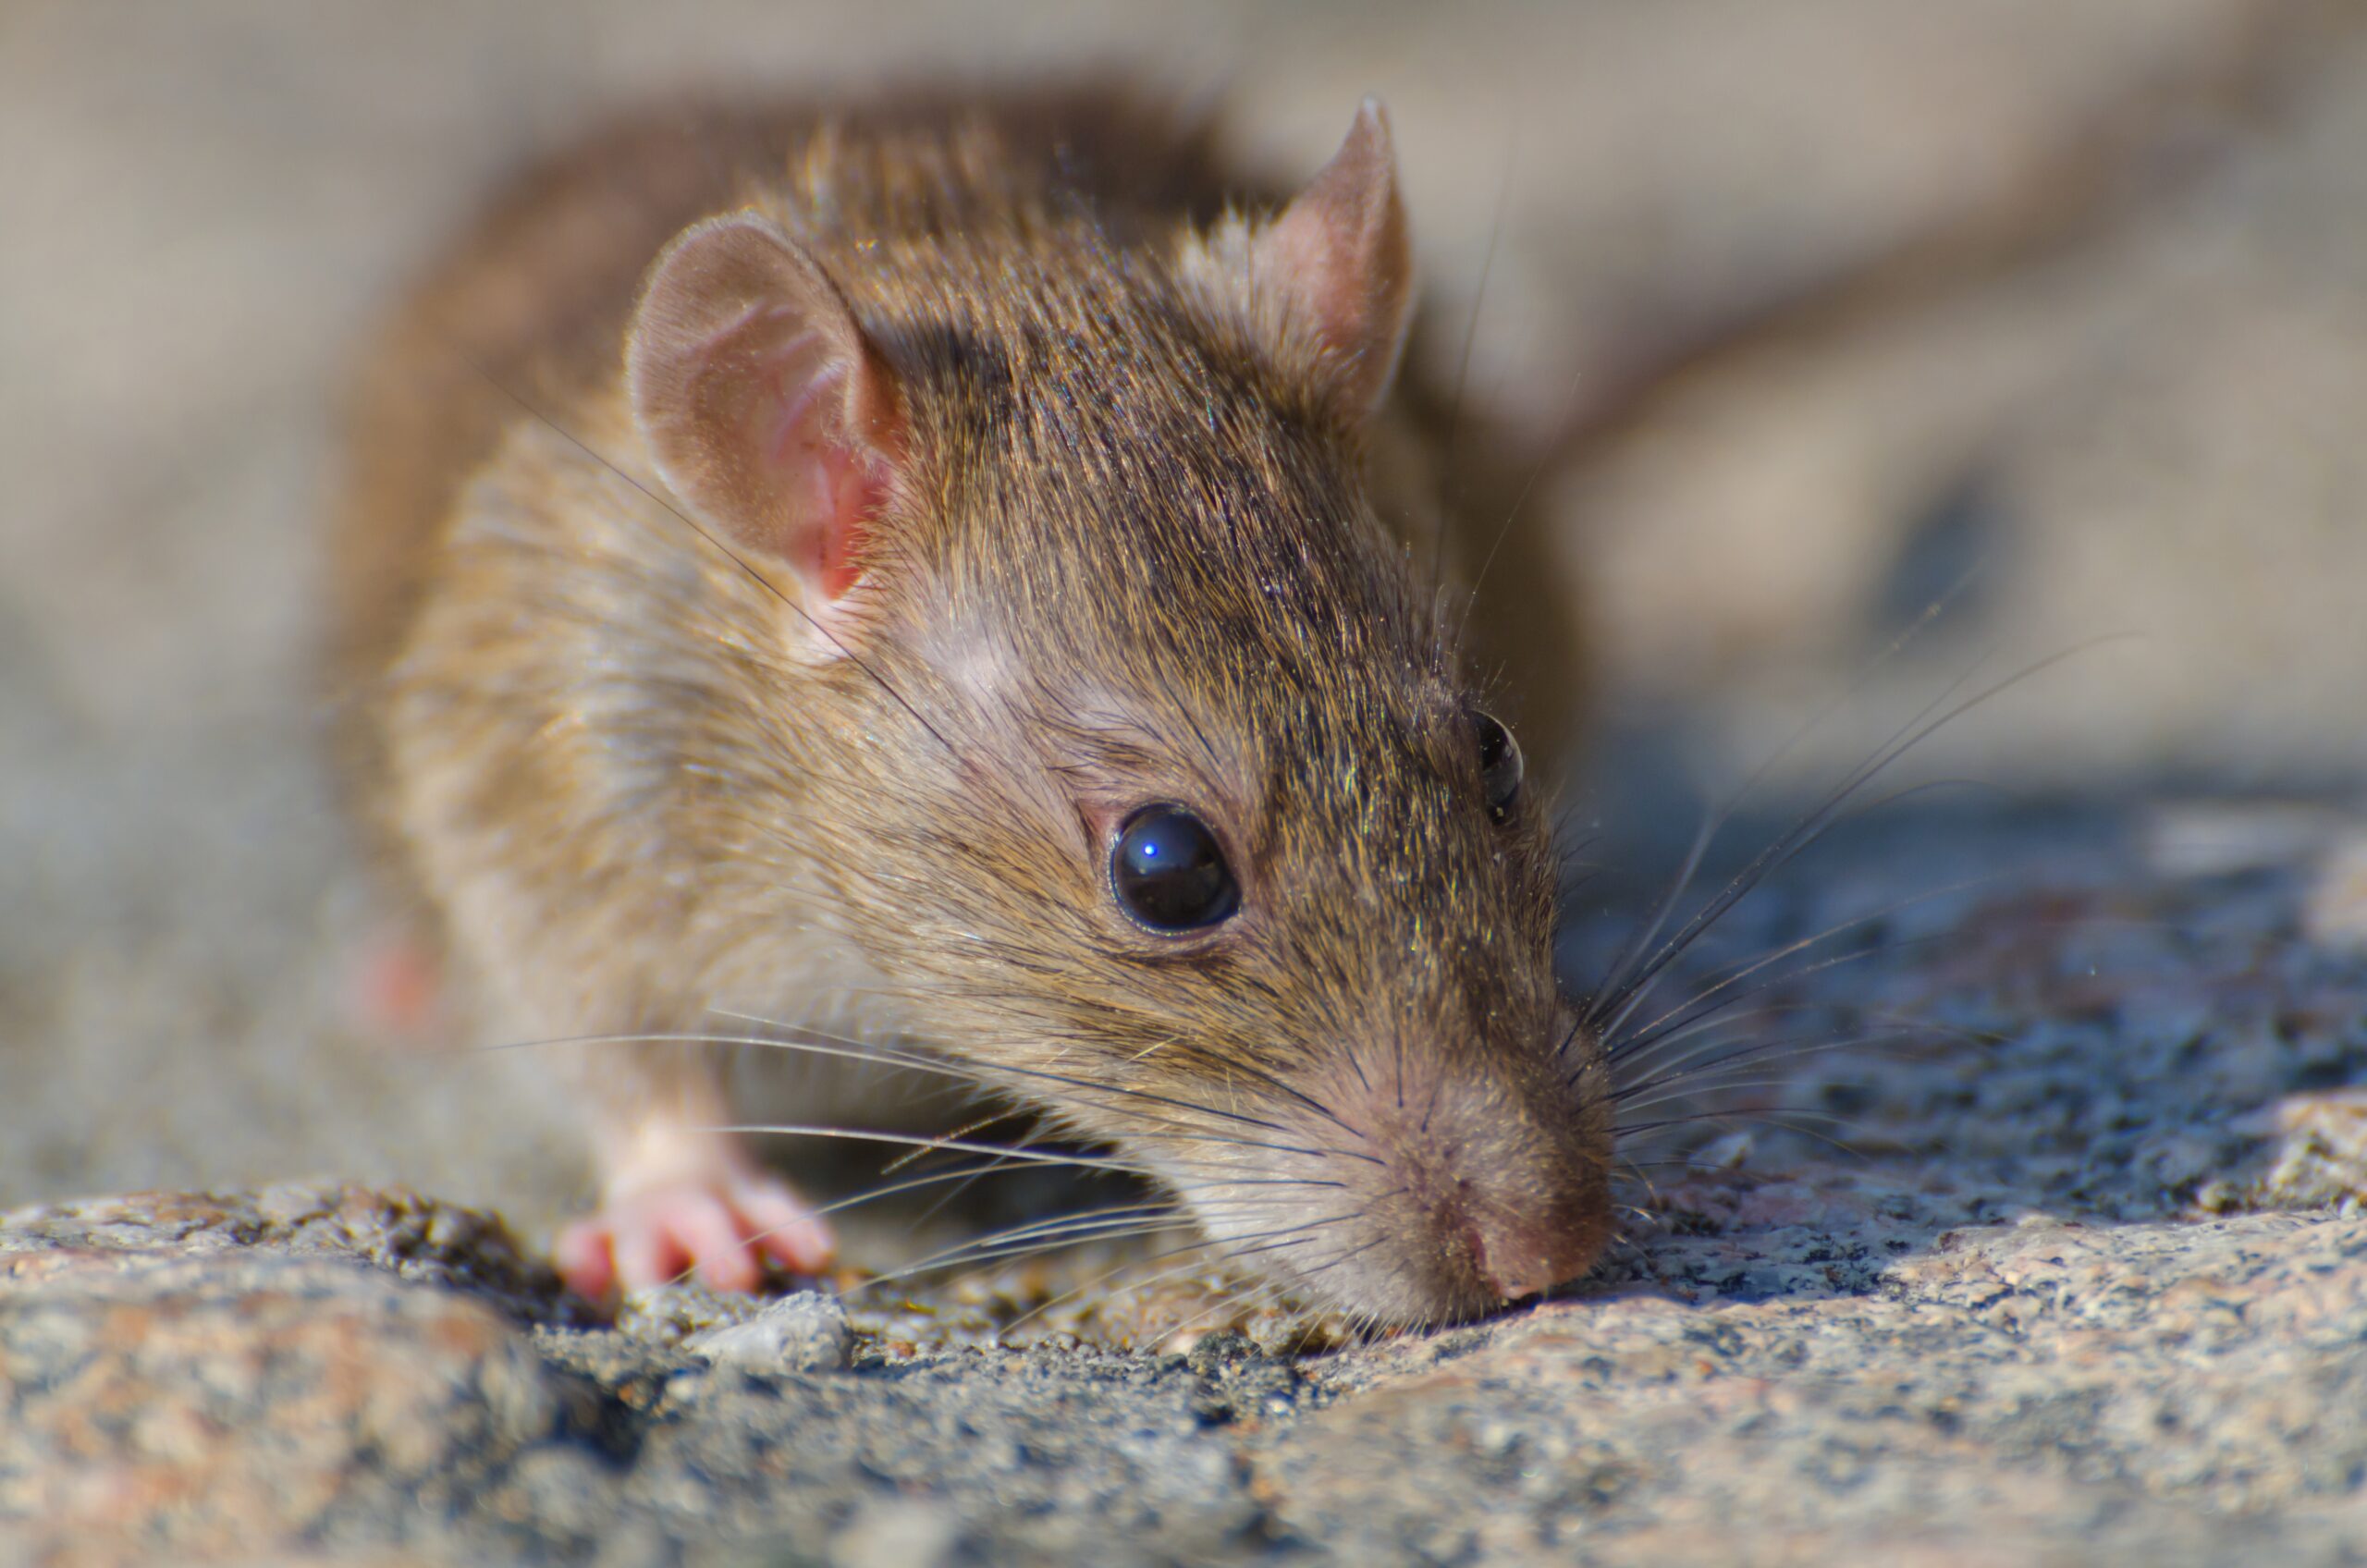 Free Pest Control Service To Combat Domestic Rat Infestations.